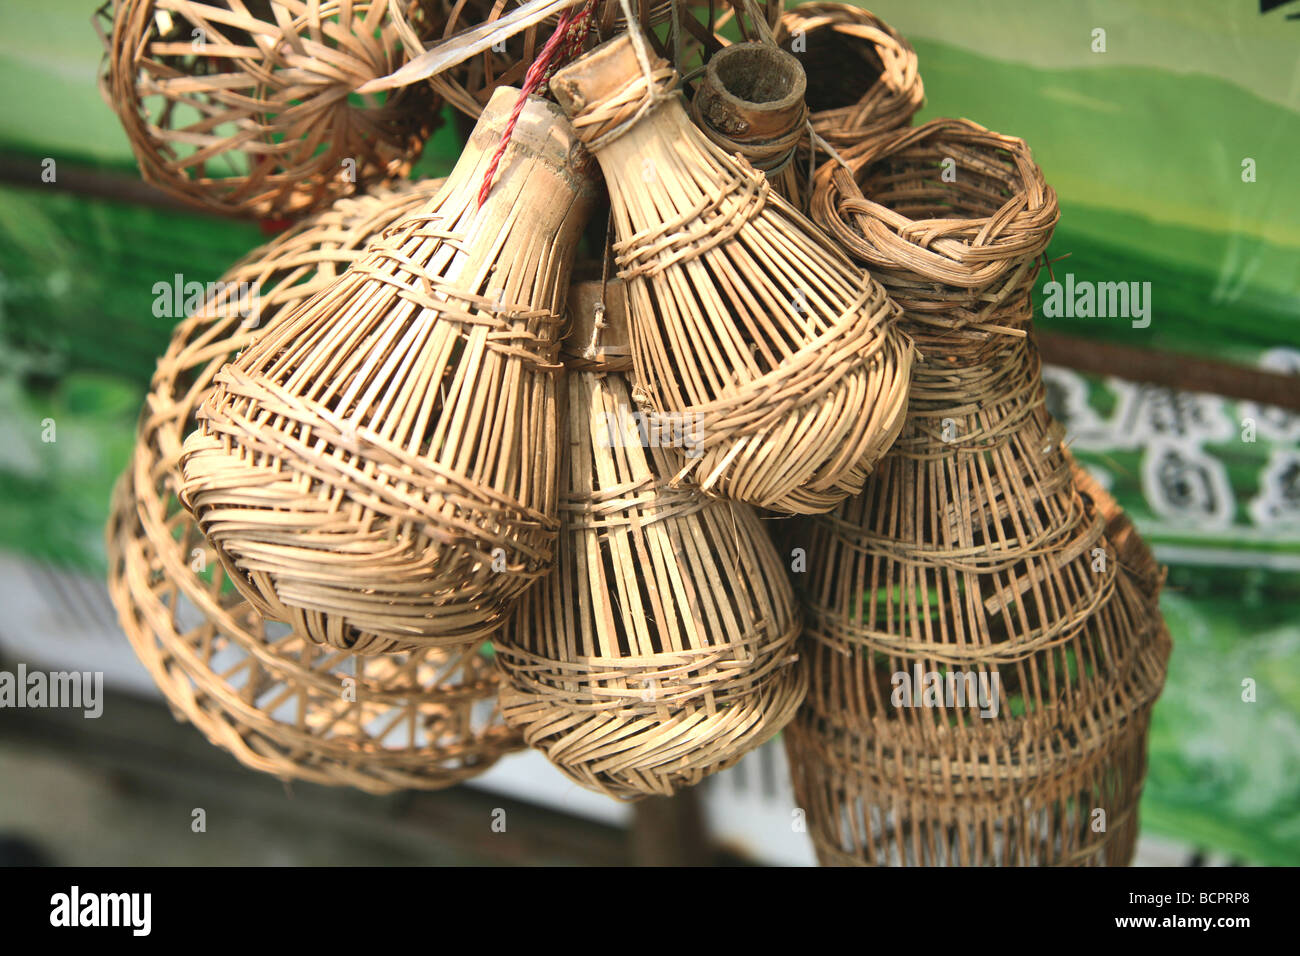 https://c8.alamy.com/comp/BCPRP8/bundle-of-cricket-cage-made-with-bamboo-yangshuo-city-guangxi-province-BCPRP8.jpg